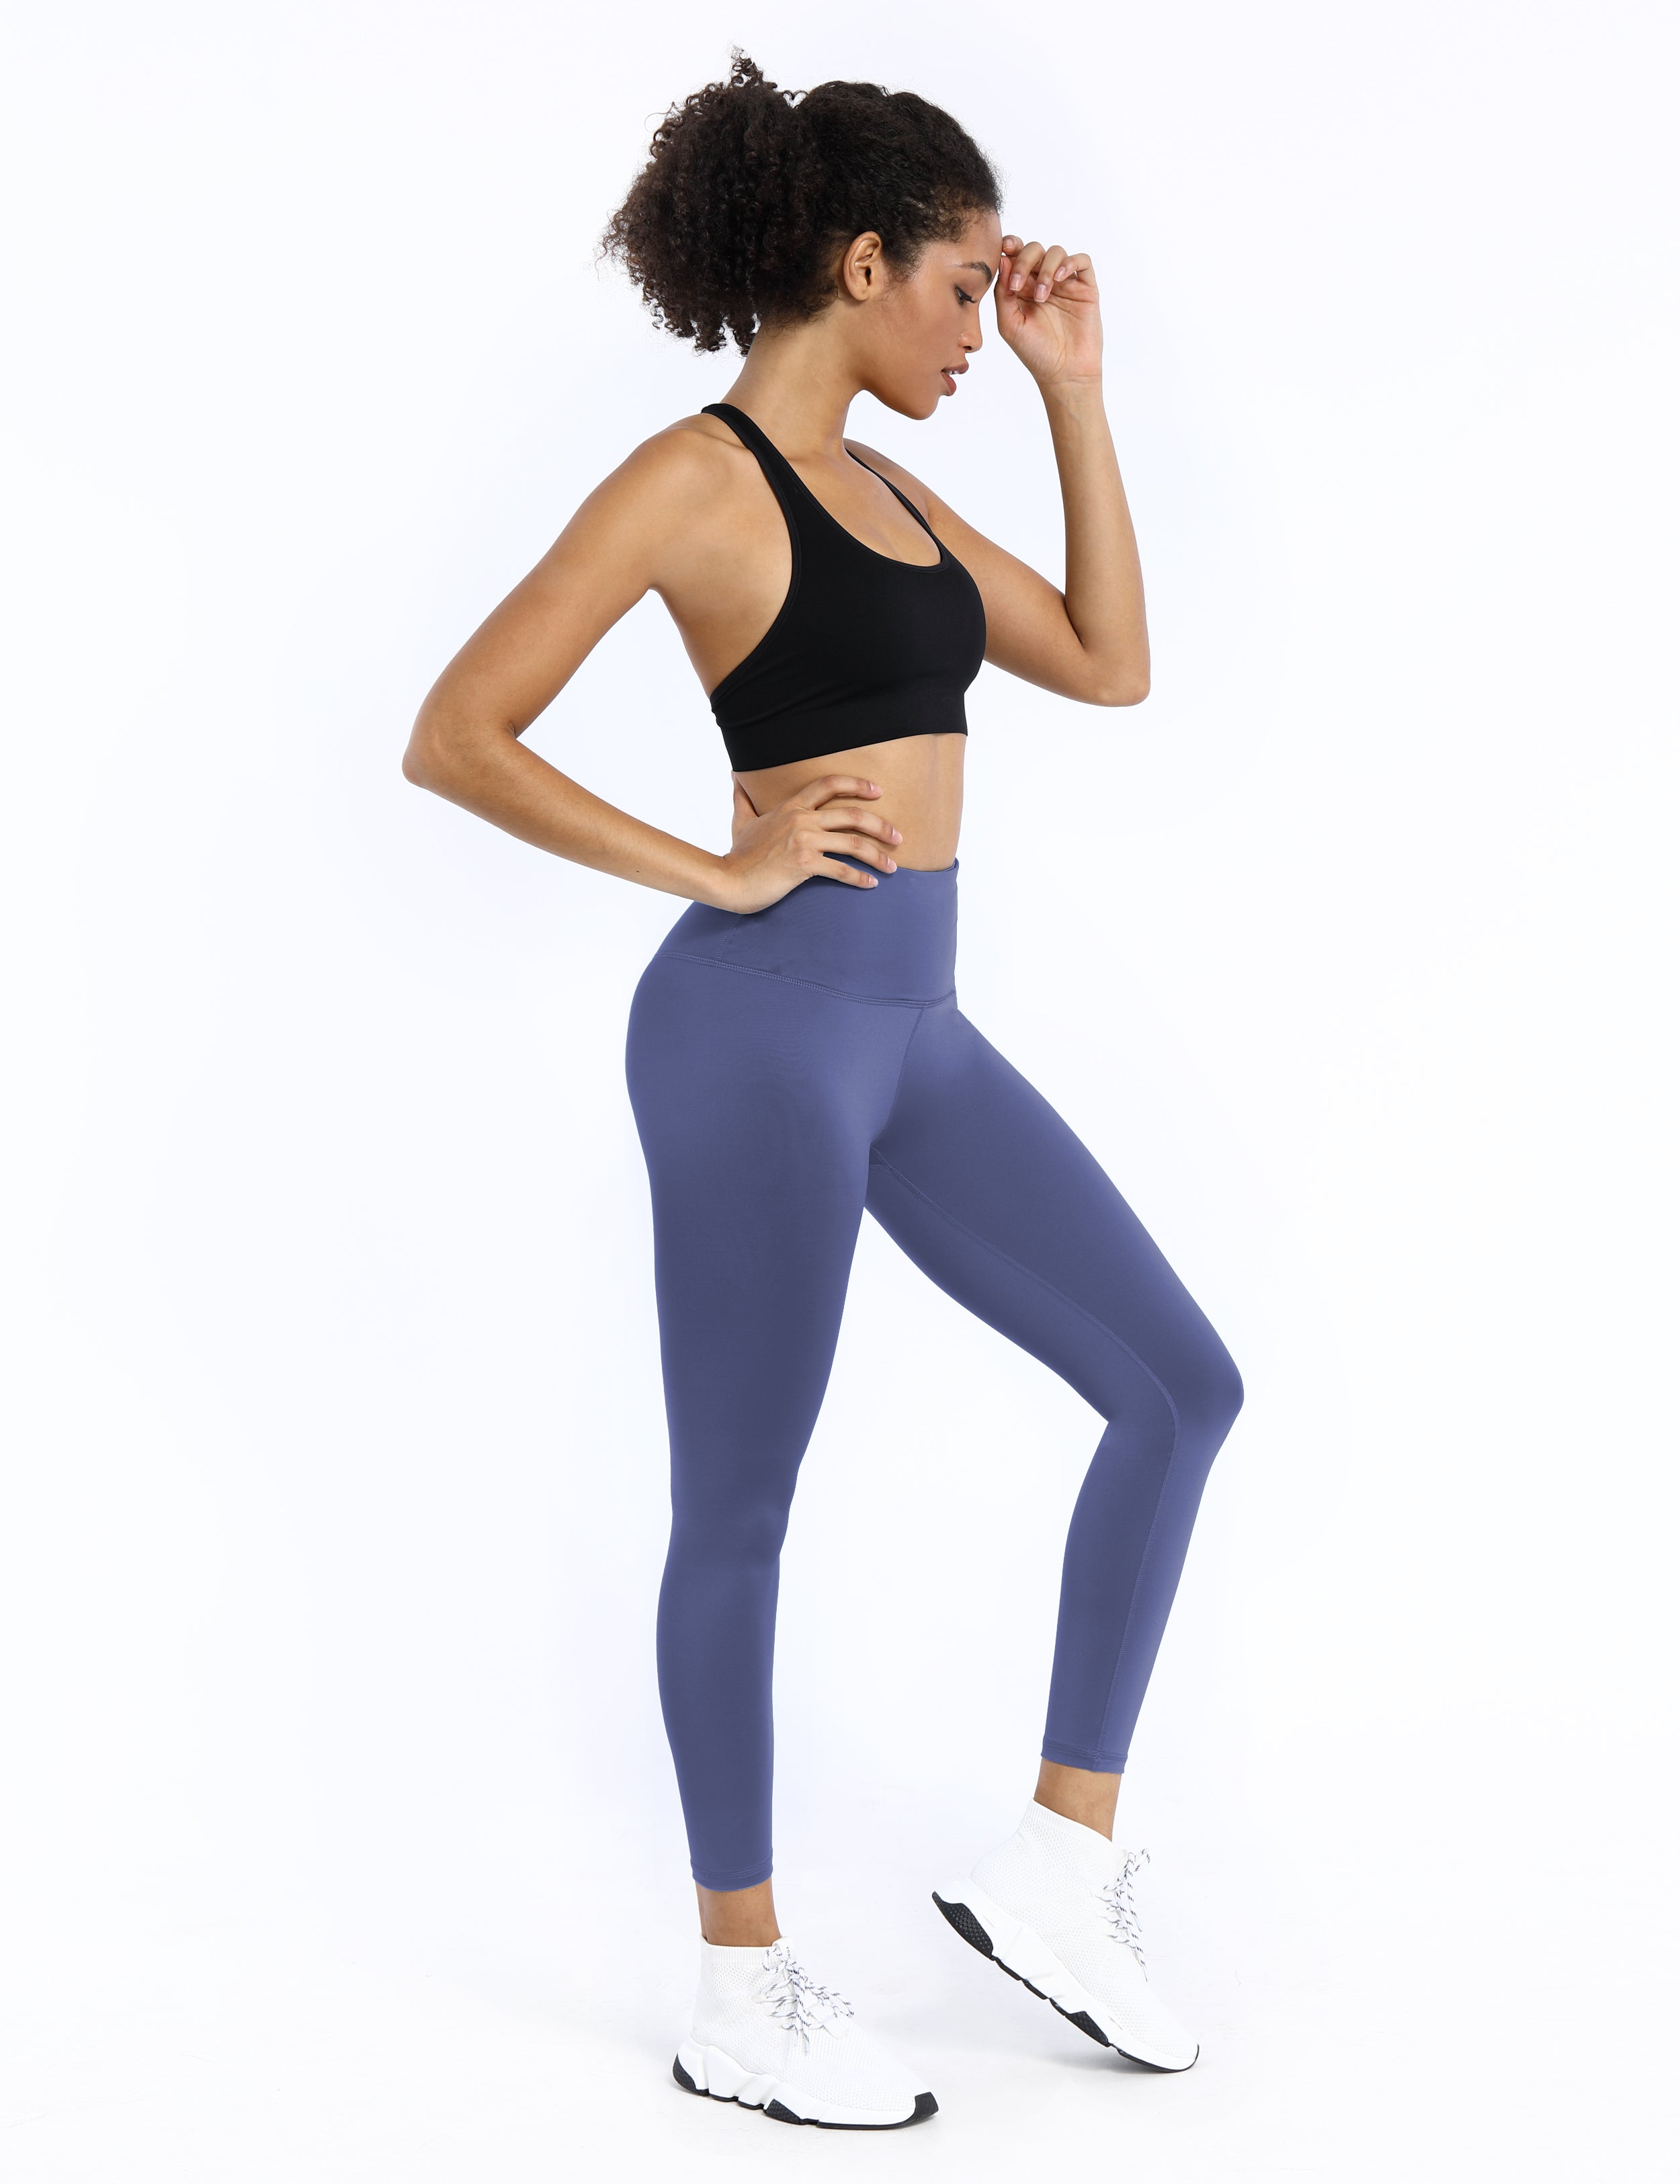 High Waist Lycra Bubblelime Yoga Pants For Women Solid Color Leggings For  Gym, Fitness, And Outdoor Sports With Elastic Fit Po1709483 From Stpf,  $21.54